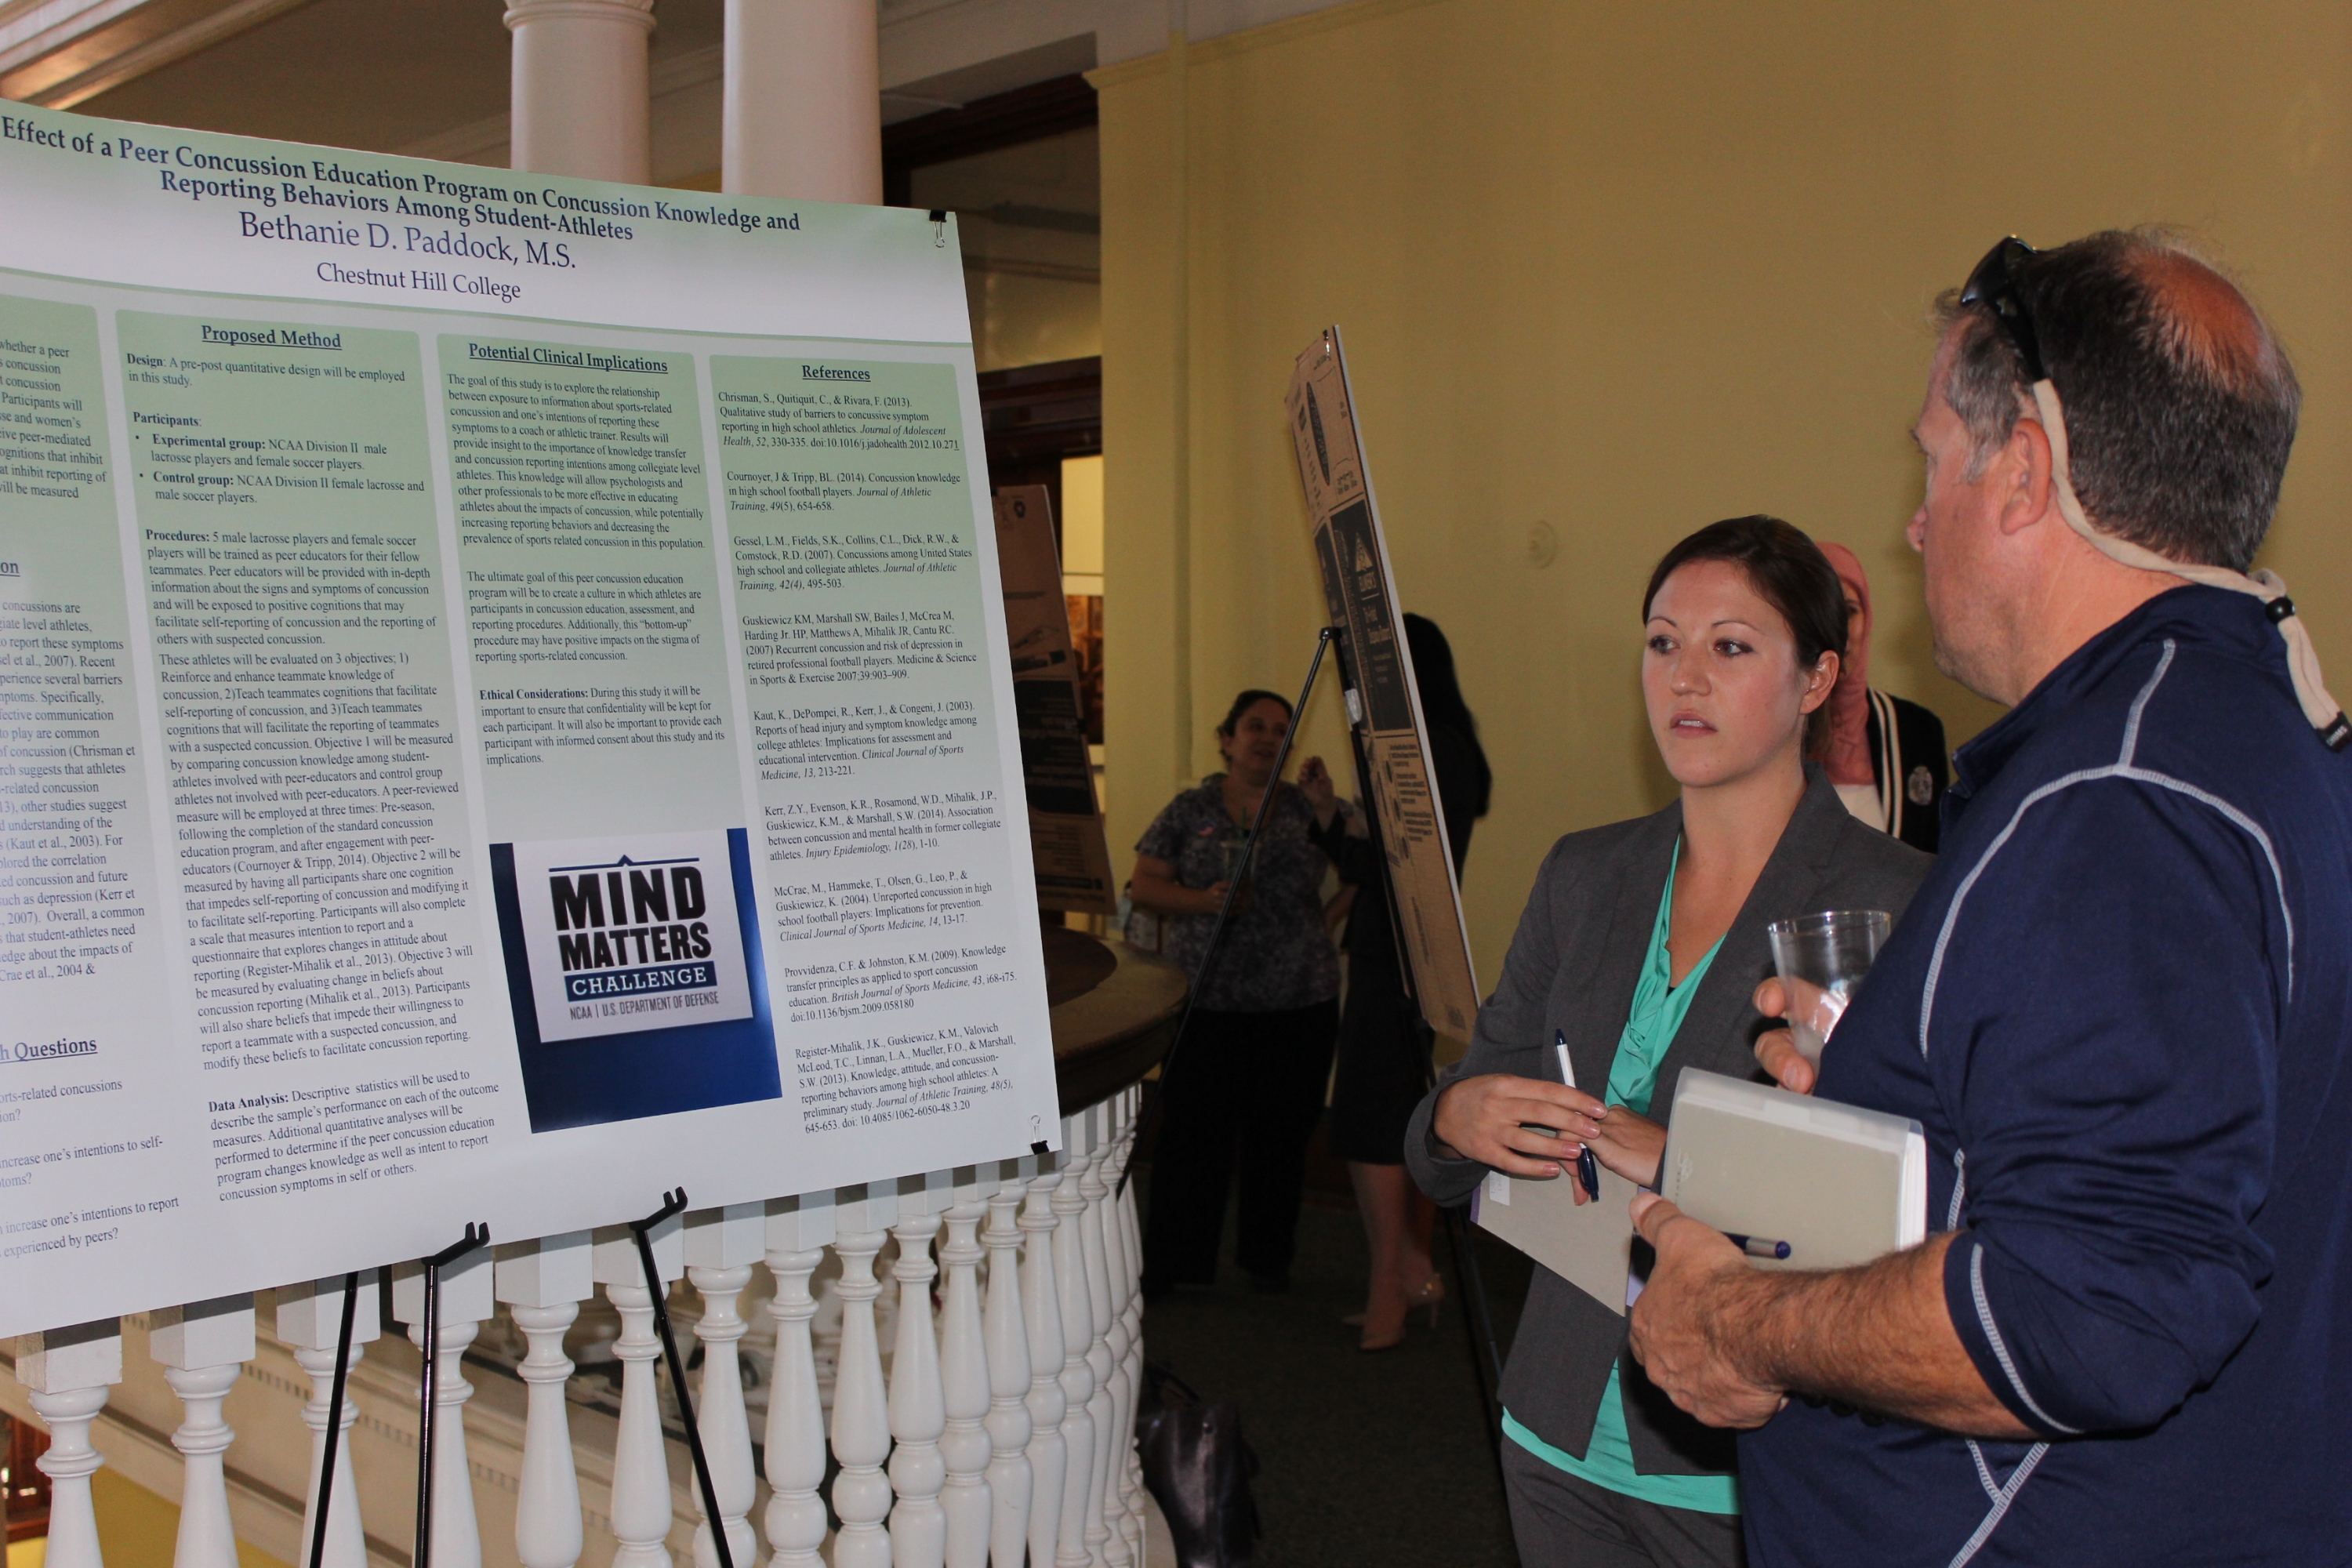 Doctoral student Bethanie Paddock explains her poster presentation about concussion education.